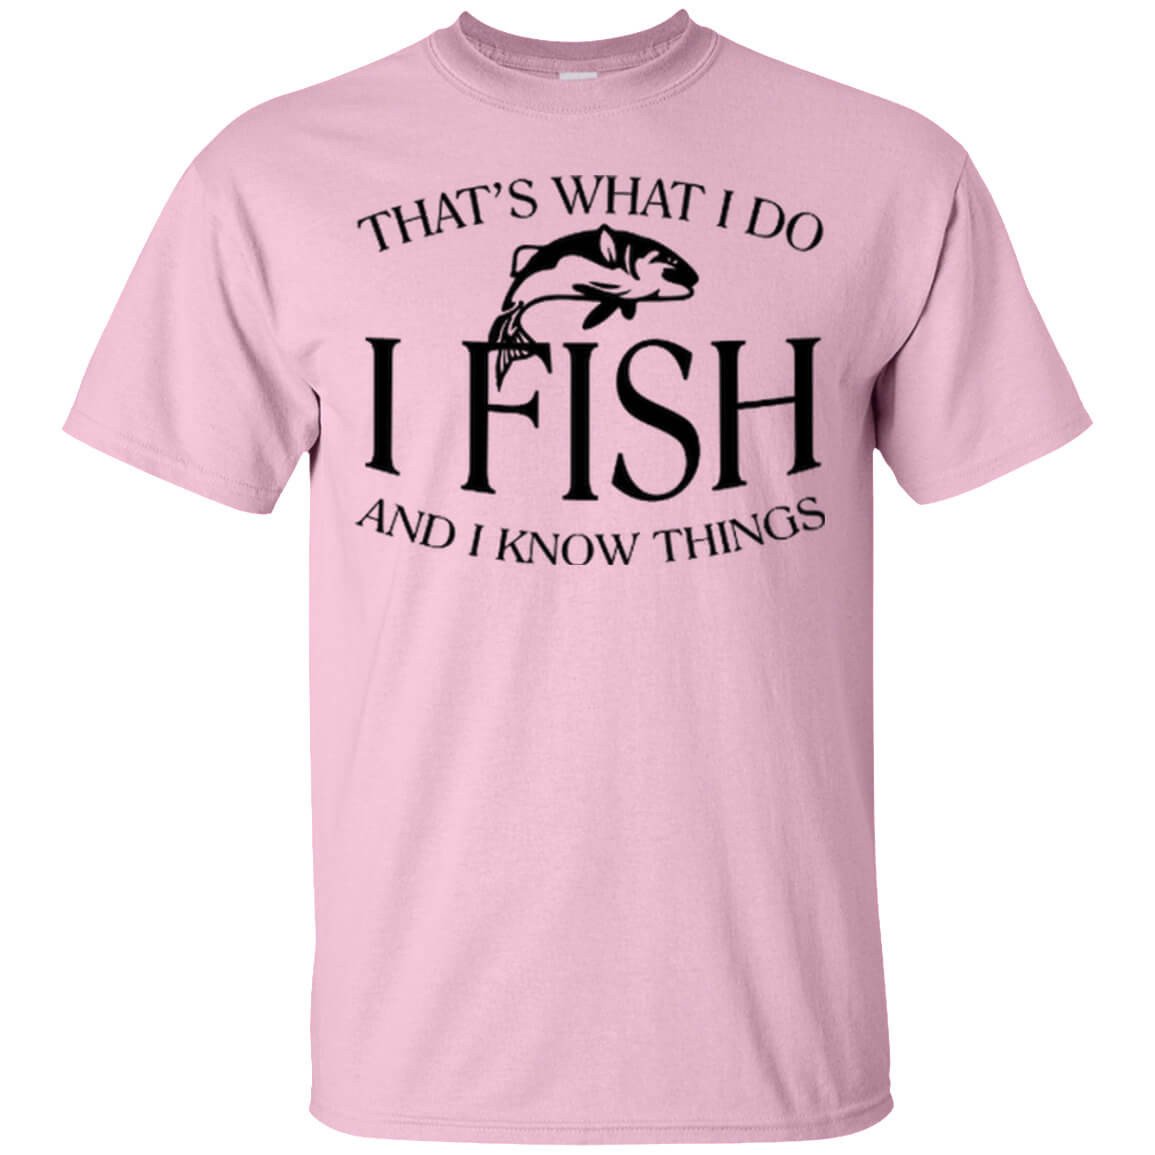 That's What I Do T-Shirt a